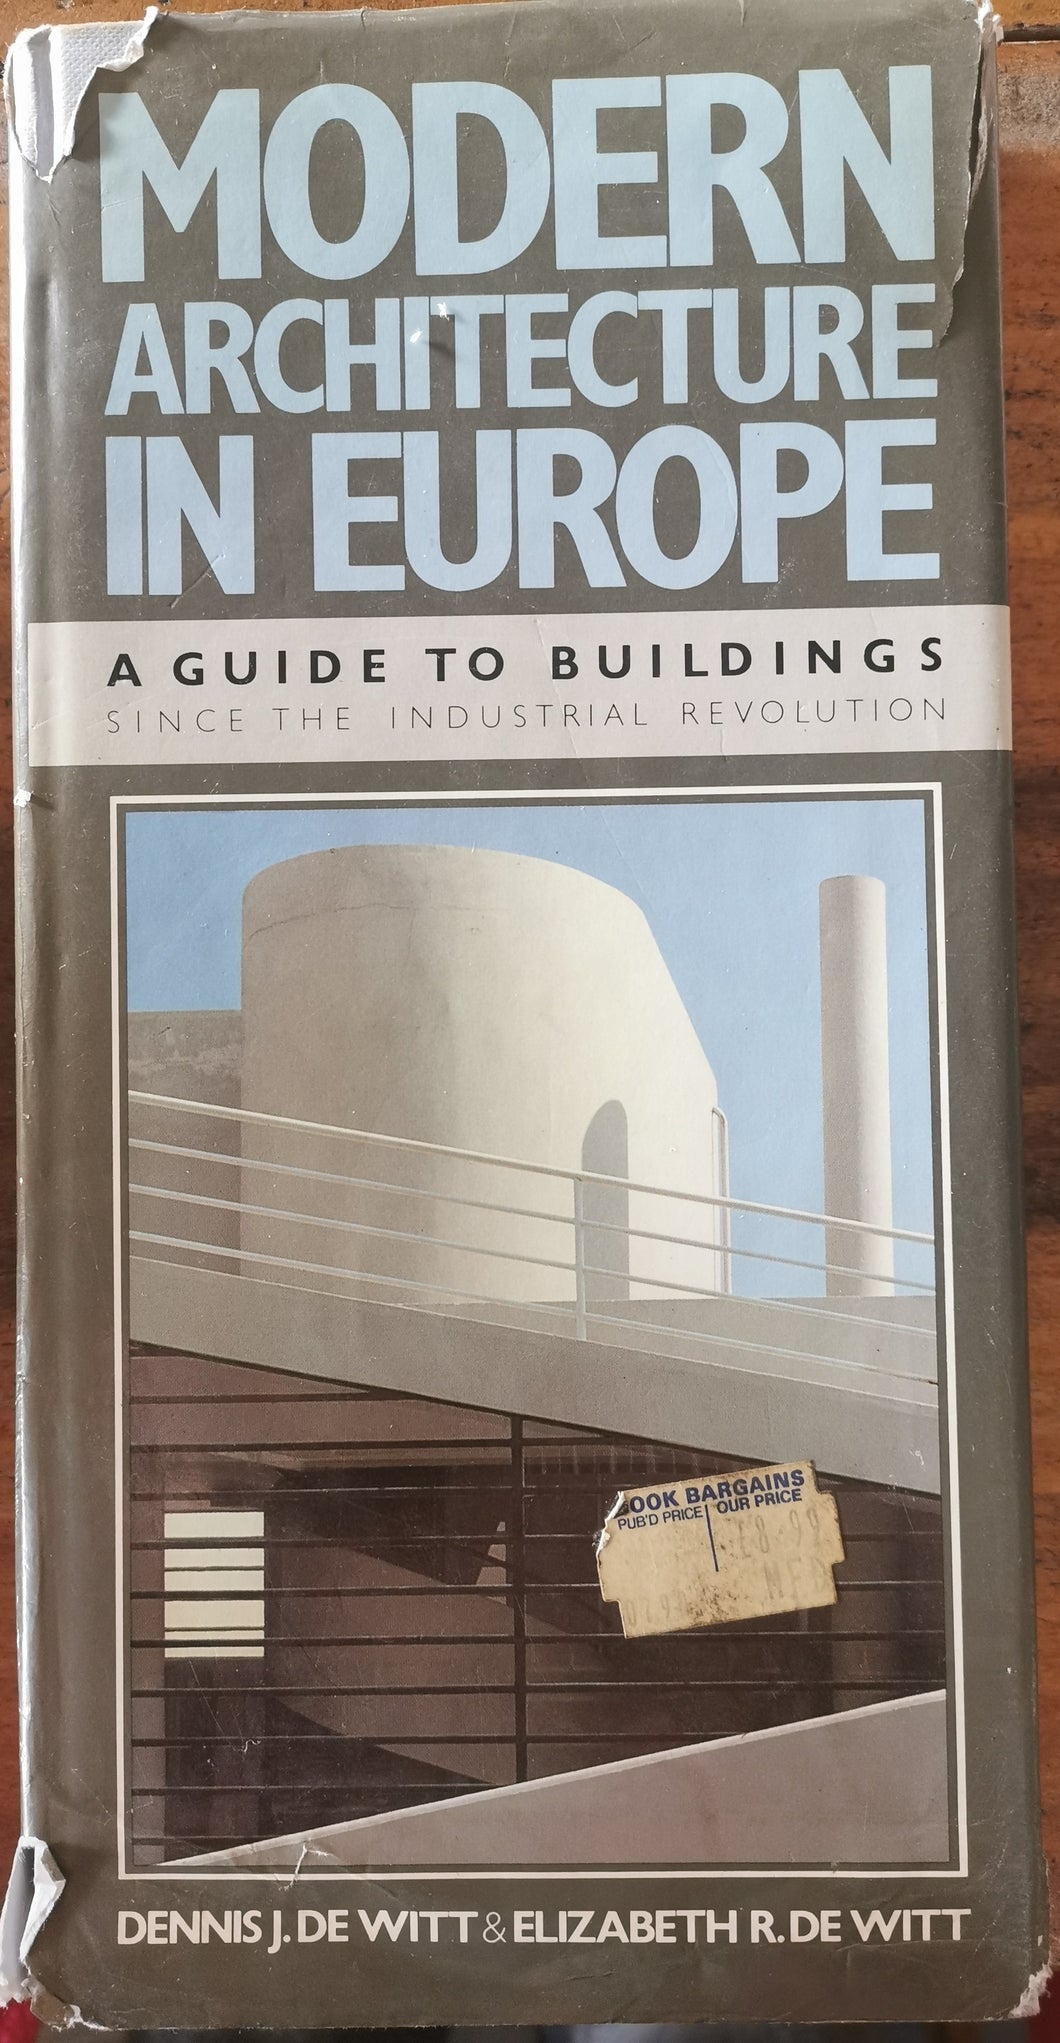 Modern Architecture in Europe - A Guide to Buildings since the Industrial Revolution